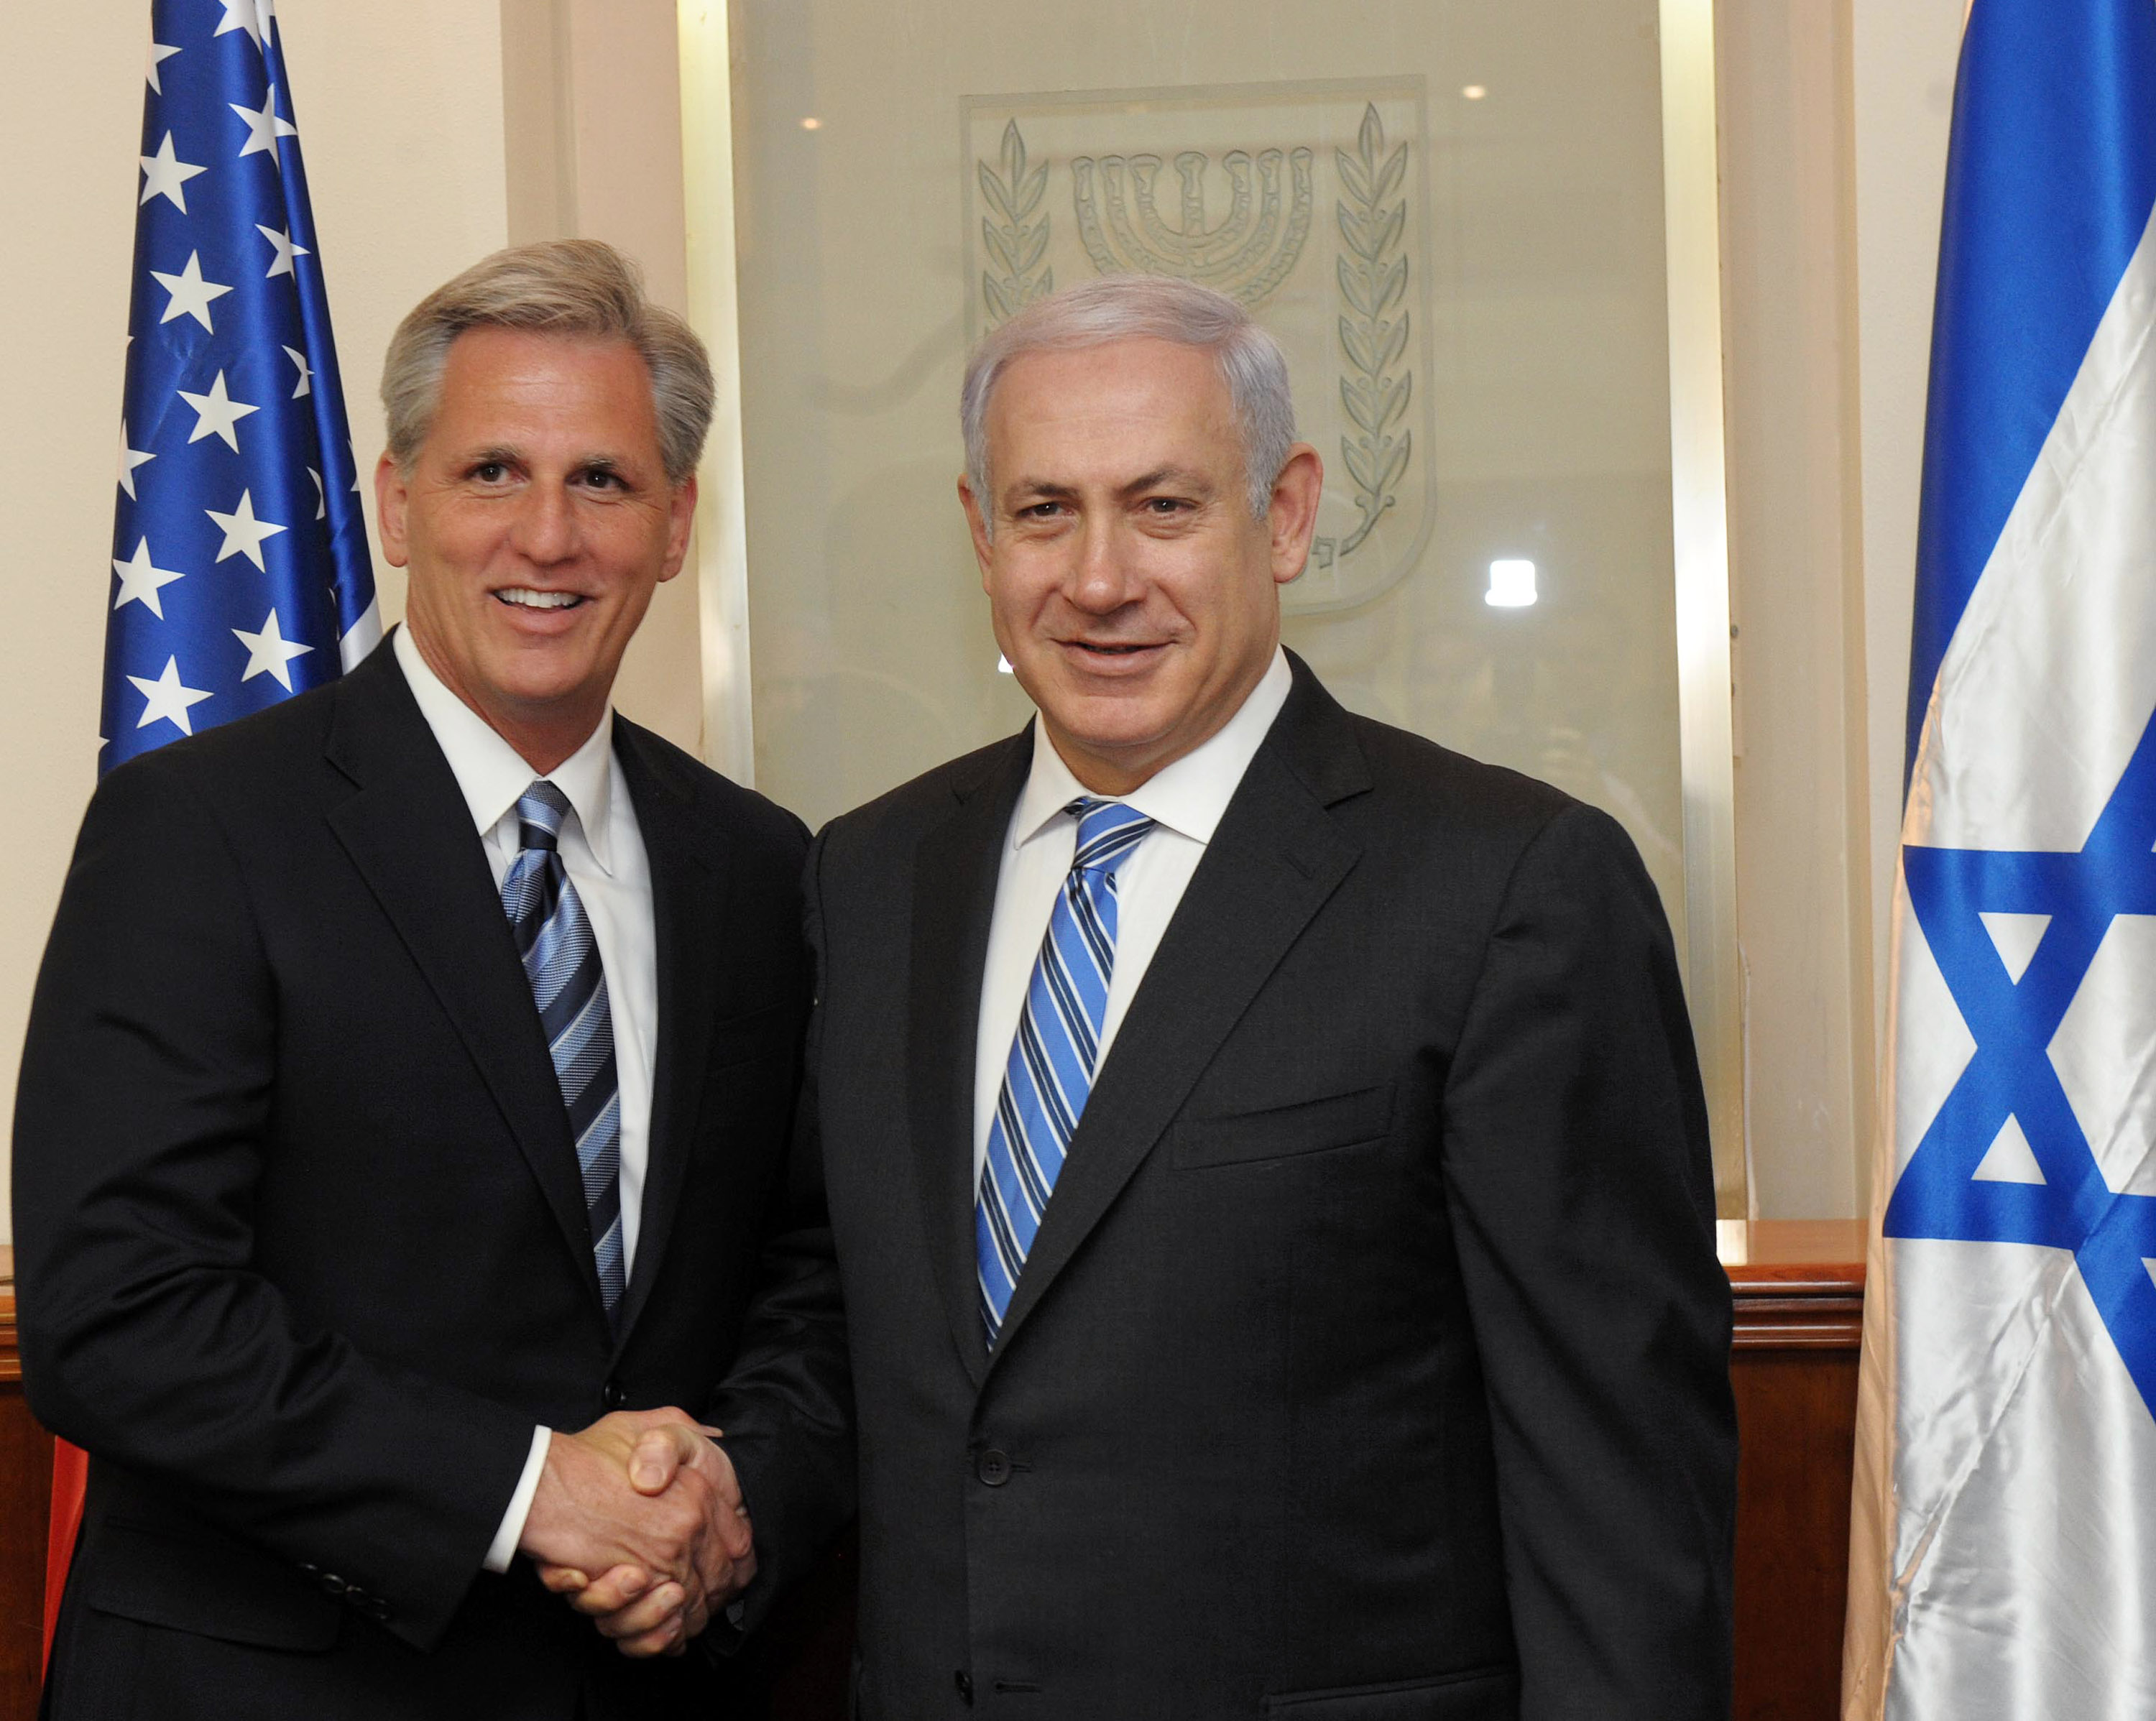 JERUSALEM, ISRAEL - AUGUST 15: (ISRAEL OUT) In this handout image provided by the Israeli Government Press Office (GPO), Israeli Prime Minister Benjamin Netanyahu shakes hands with US Congressman Kevin McCarthy (L) at the Prime Minister's office on August 15, 2011 in Jerusalem, Israel. (Avi Ohayon/GPO via Getty Images)